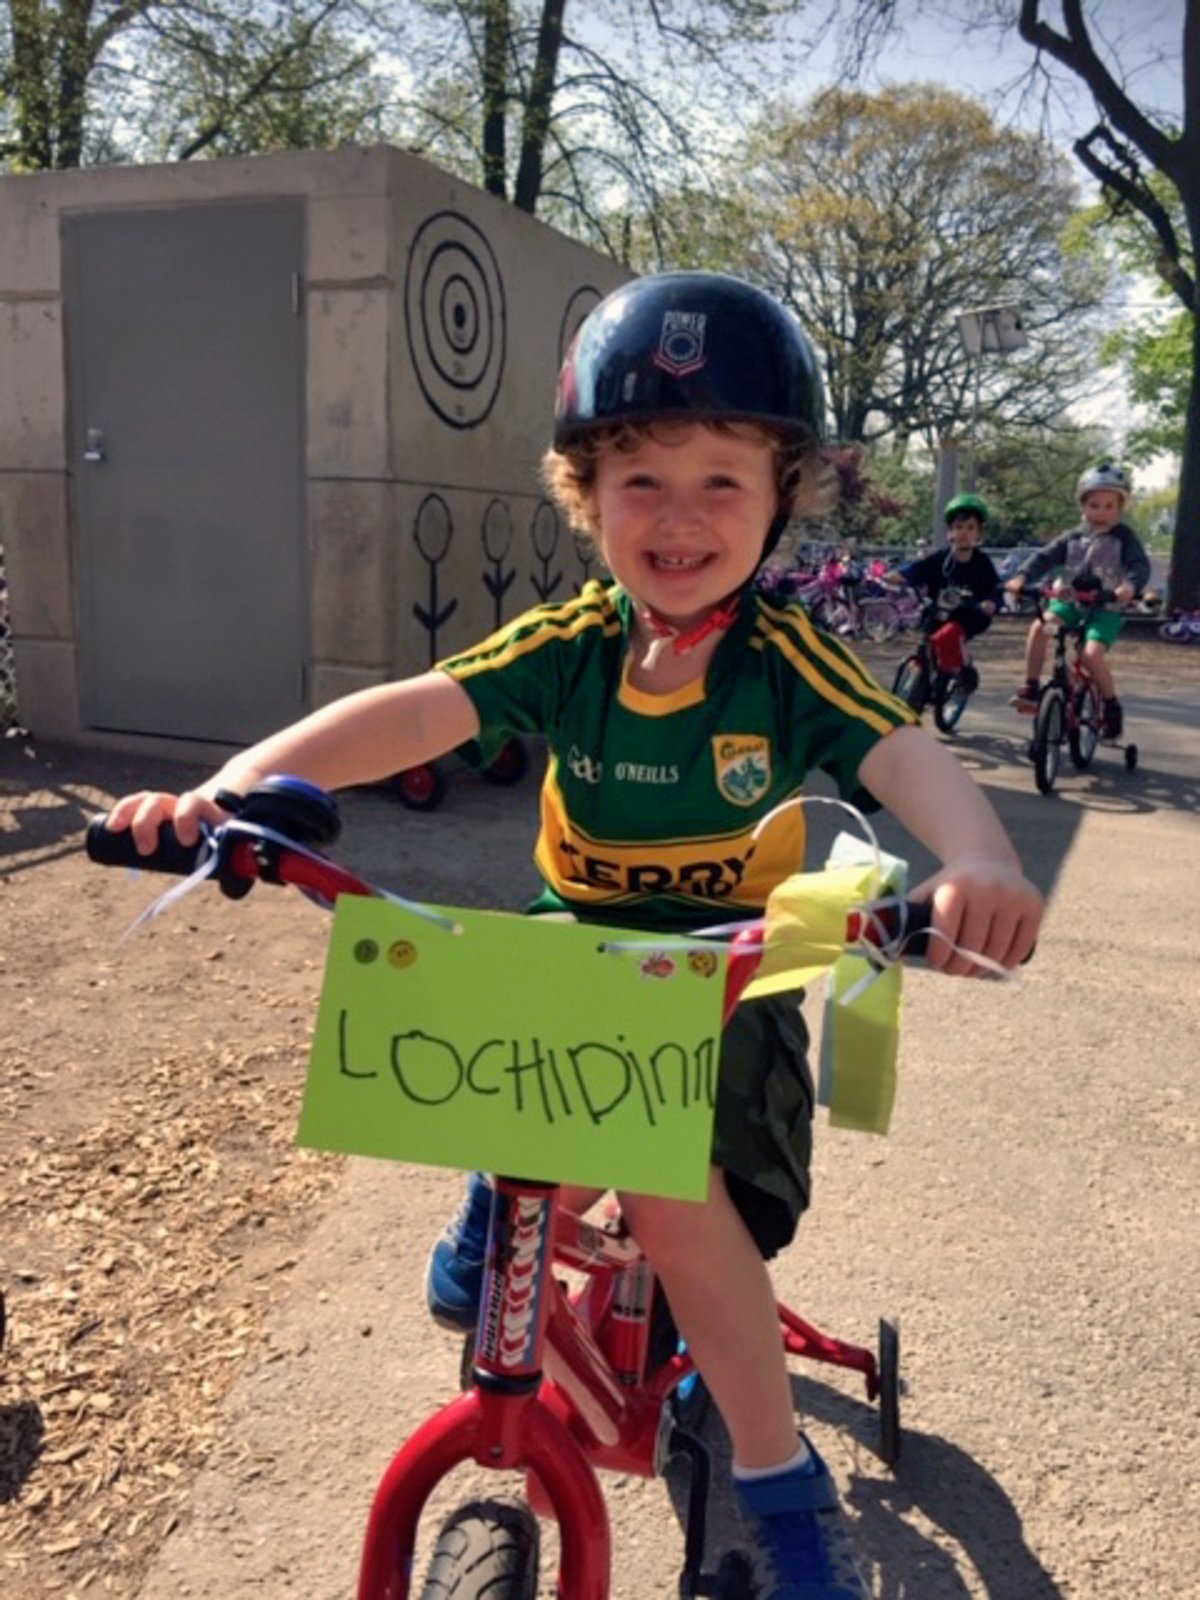 Lochlainn at a school bicycle event, September 2017.